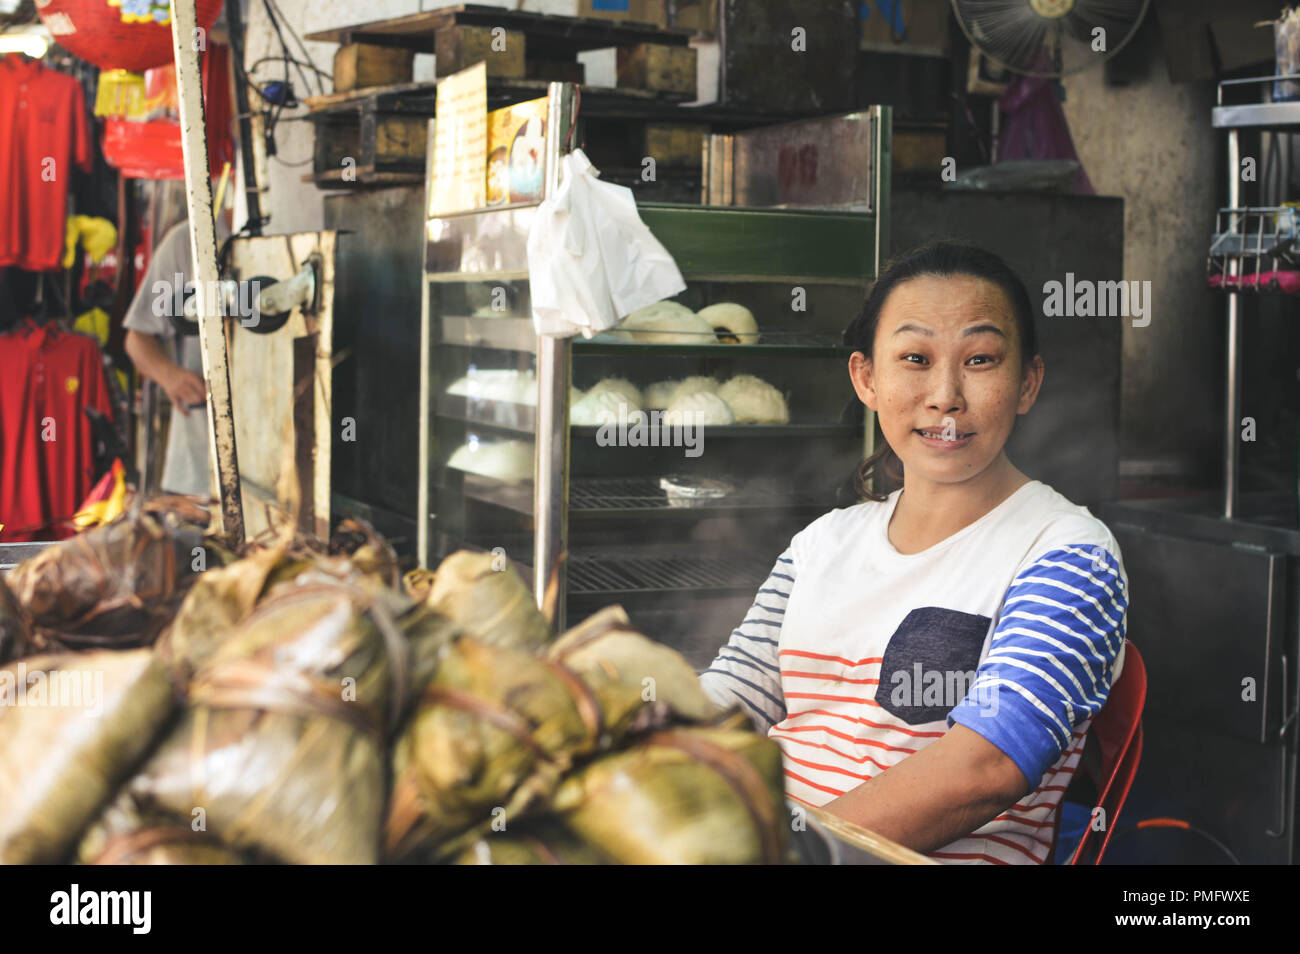 Kuala Lumpur, Malaysia - 9 September, 2017: Chinese street vendor sells sweet rice with coconut in the streets of Kuala Lumpur, Malaysia Stock Photo